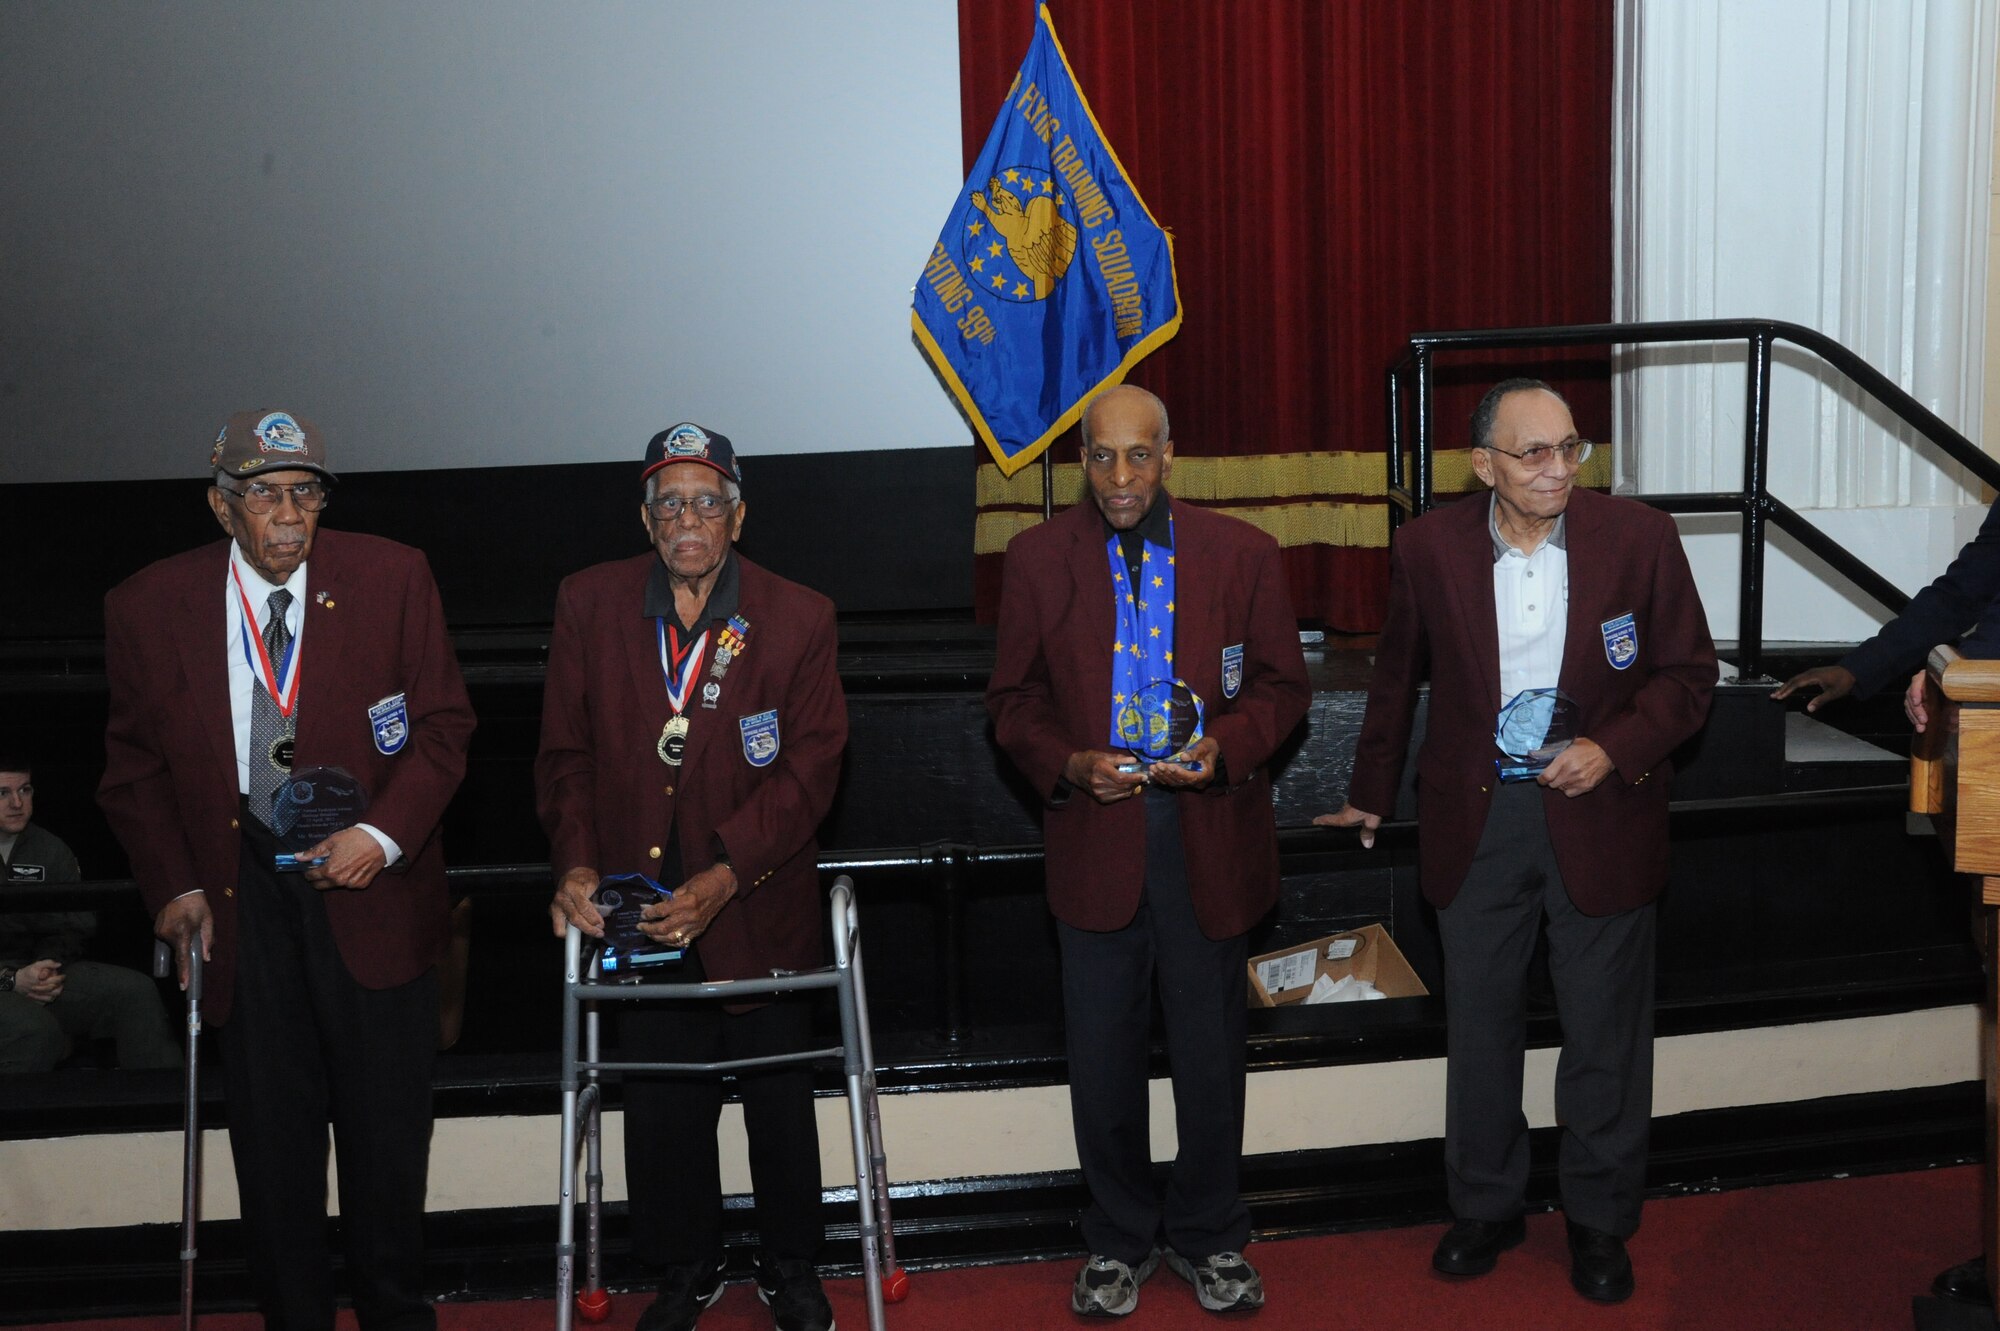 The contributions of Tuskegee Airmen Warren Eusan, Thomas Ellis, Dr. Granville Coggs and Dr. Eugene Derricotte were recognized during an event April 23 at the Joint Base San Antonio-Randolph Taj Mahal. The 99th Flying Training Squadron's fourth annual Tuskegee Heritage Breakfast paid tribute to the legacy of the segregated fighter group that fought fascism abroad and racism at home during World War II. (U.S. Air Force photo/Rich McFadden) 